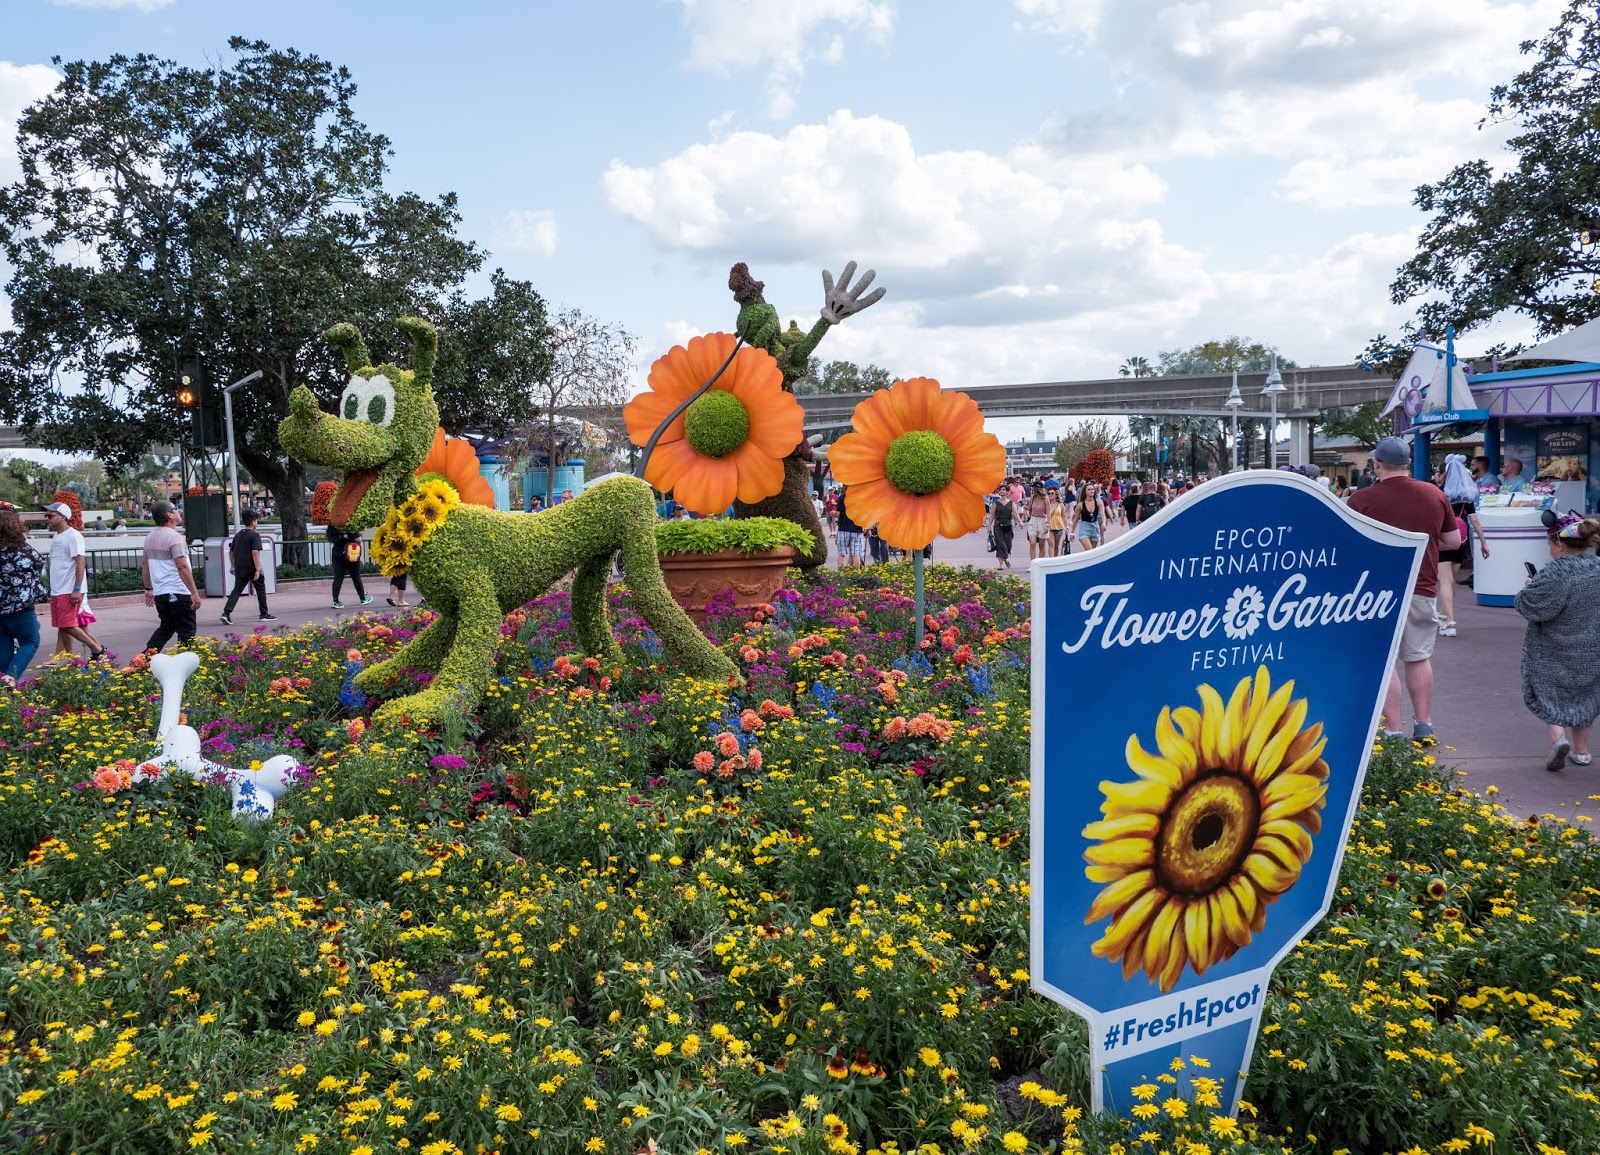 Pluto topiary at the 2019 Epcot International Flower and Garden Festival